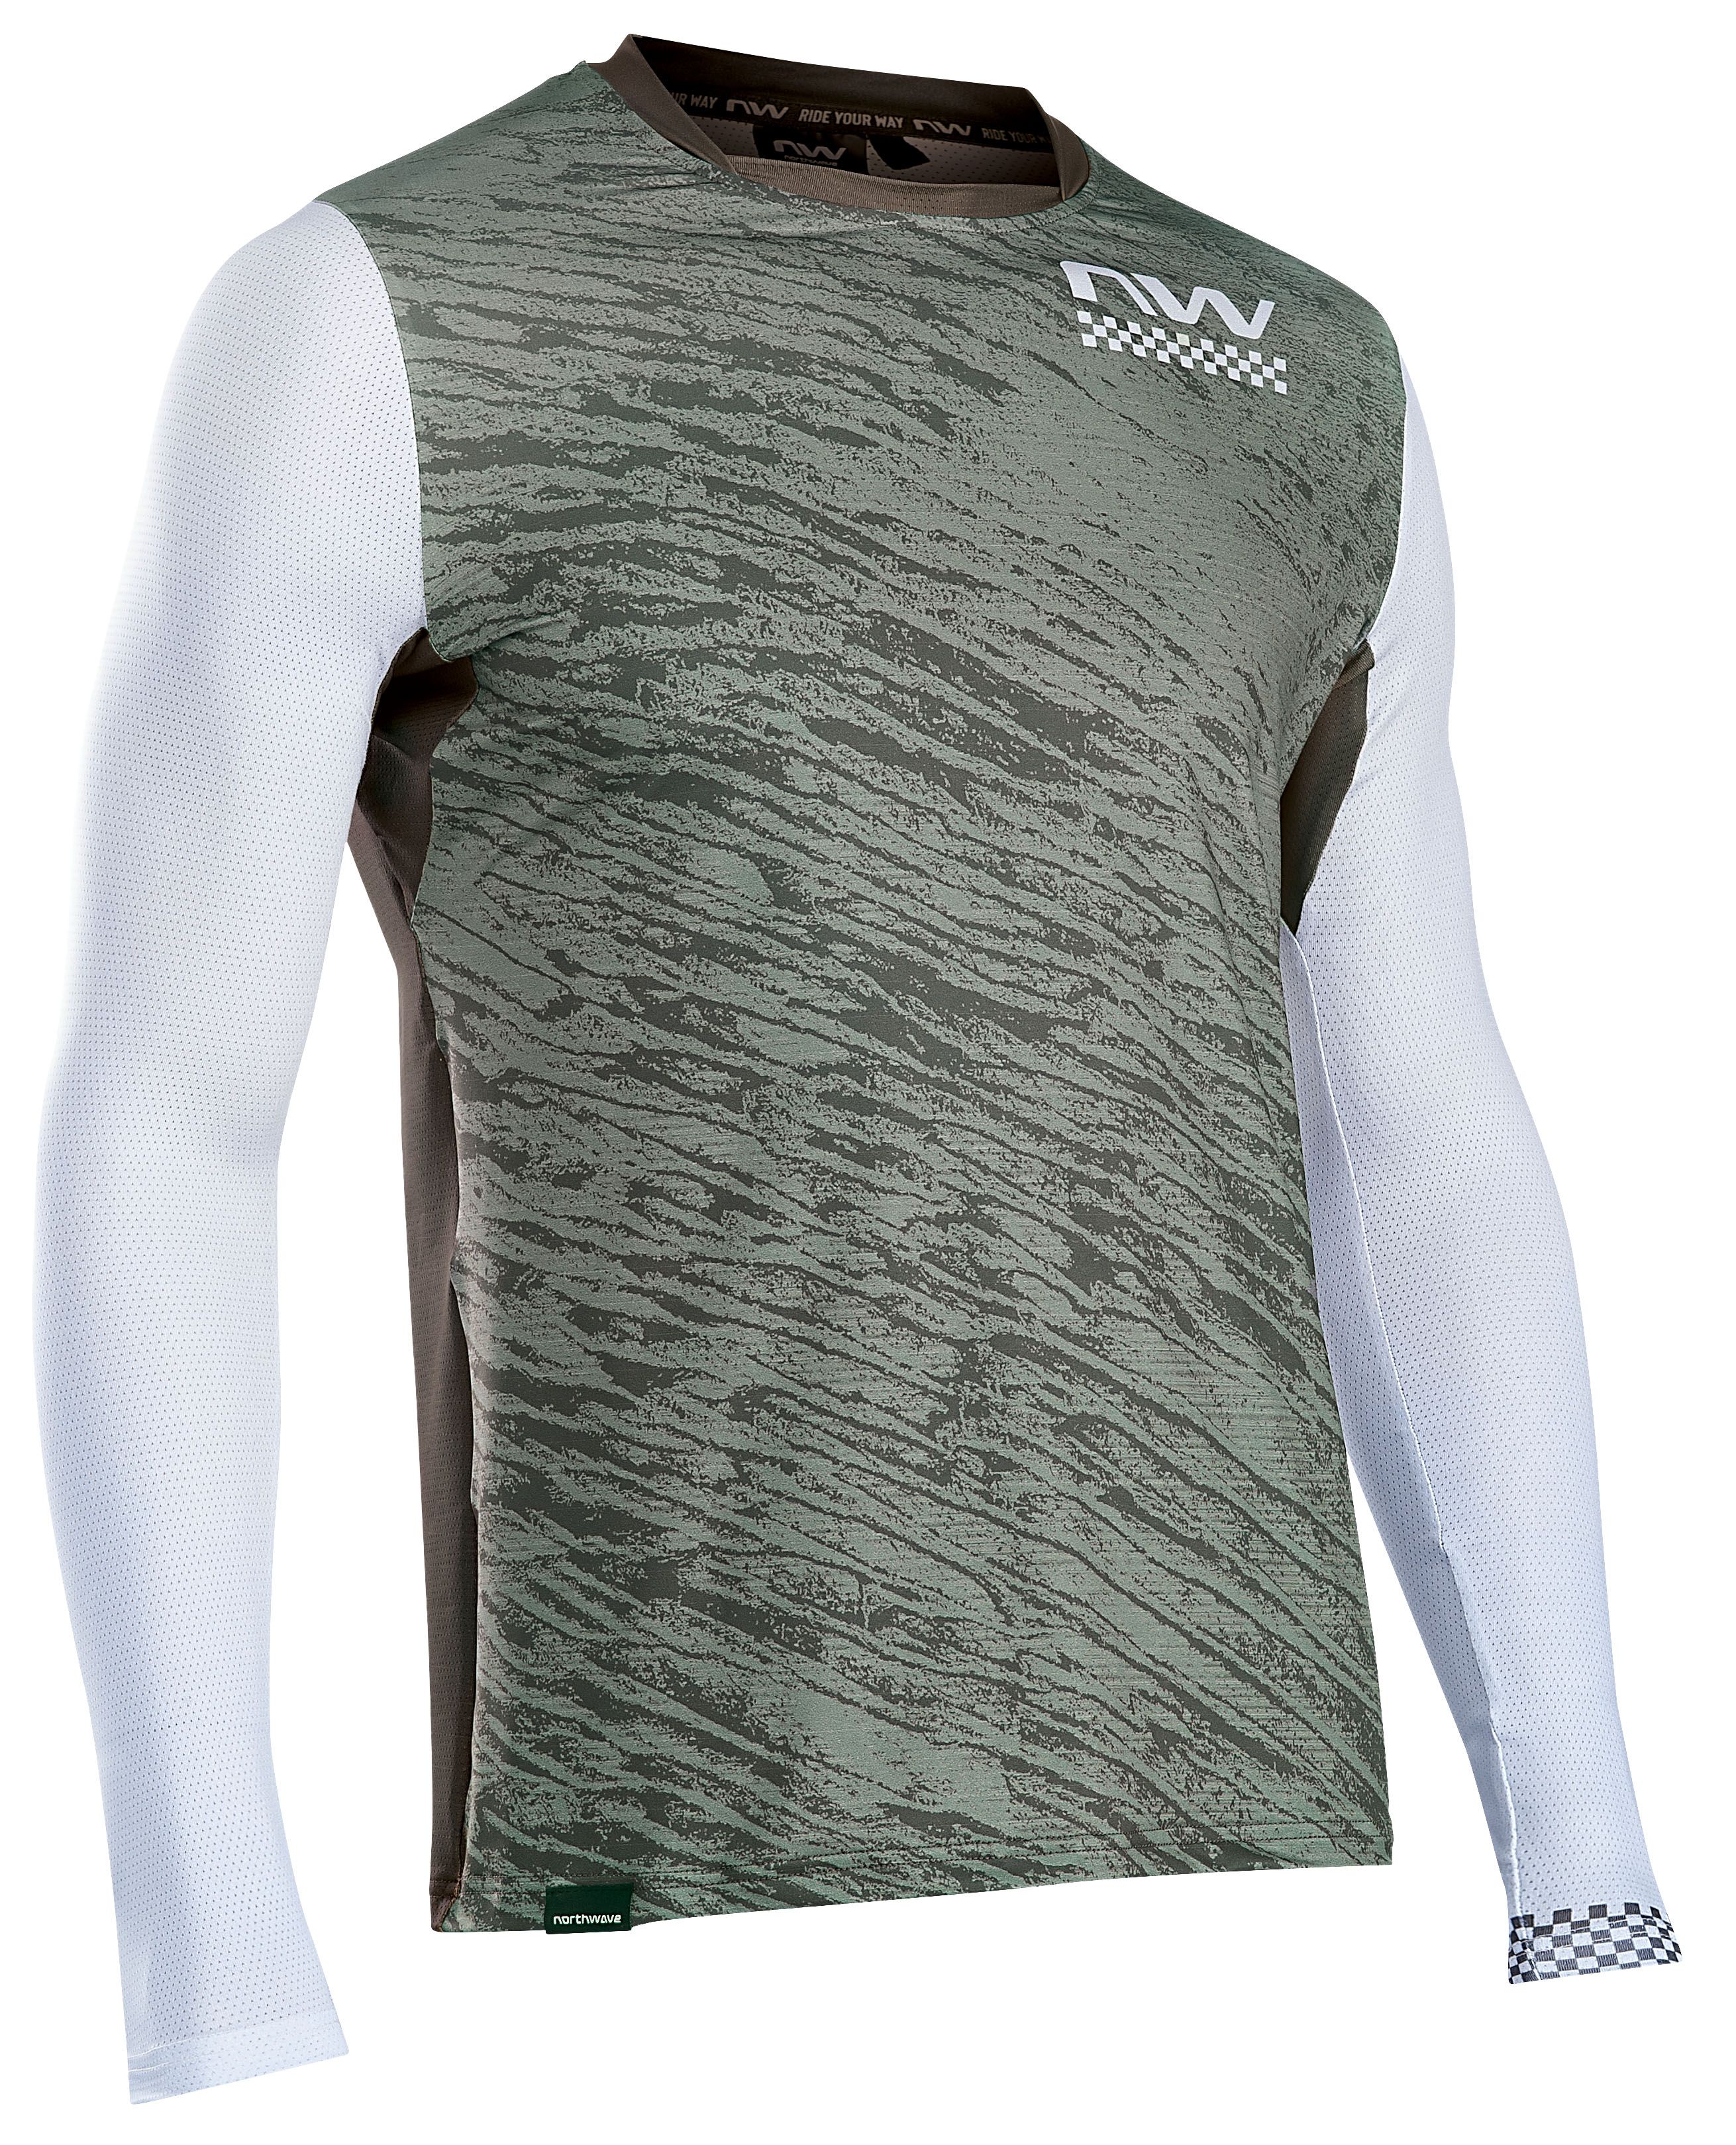 Northwave Bomb Jersey Long Sleeves, green forest/grey